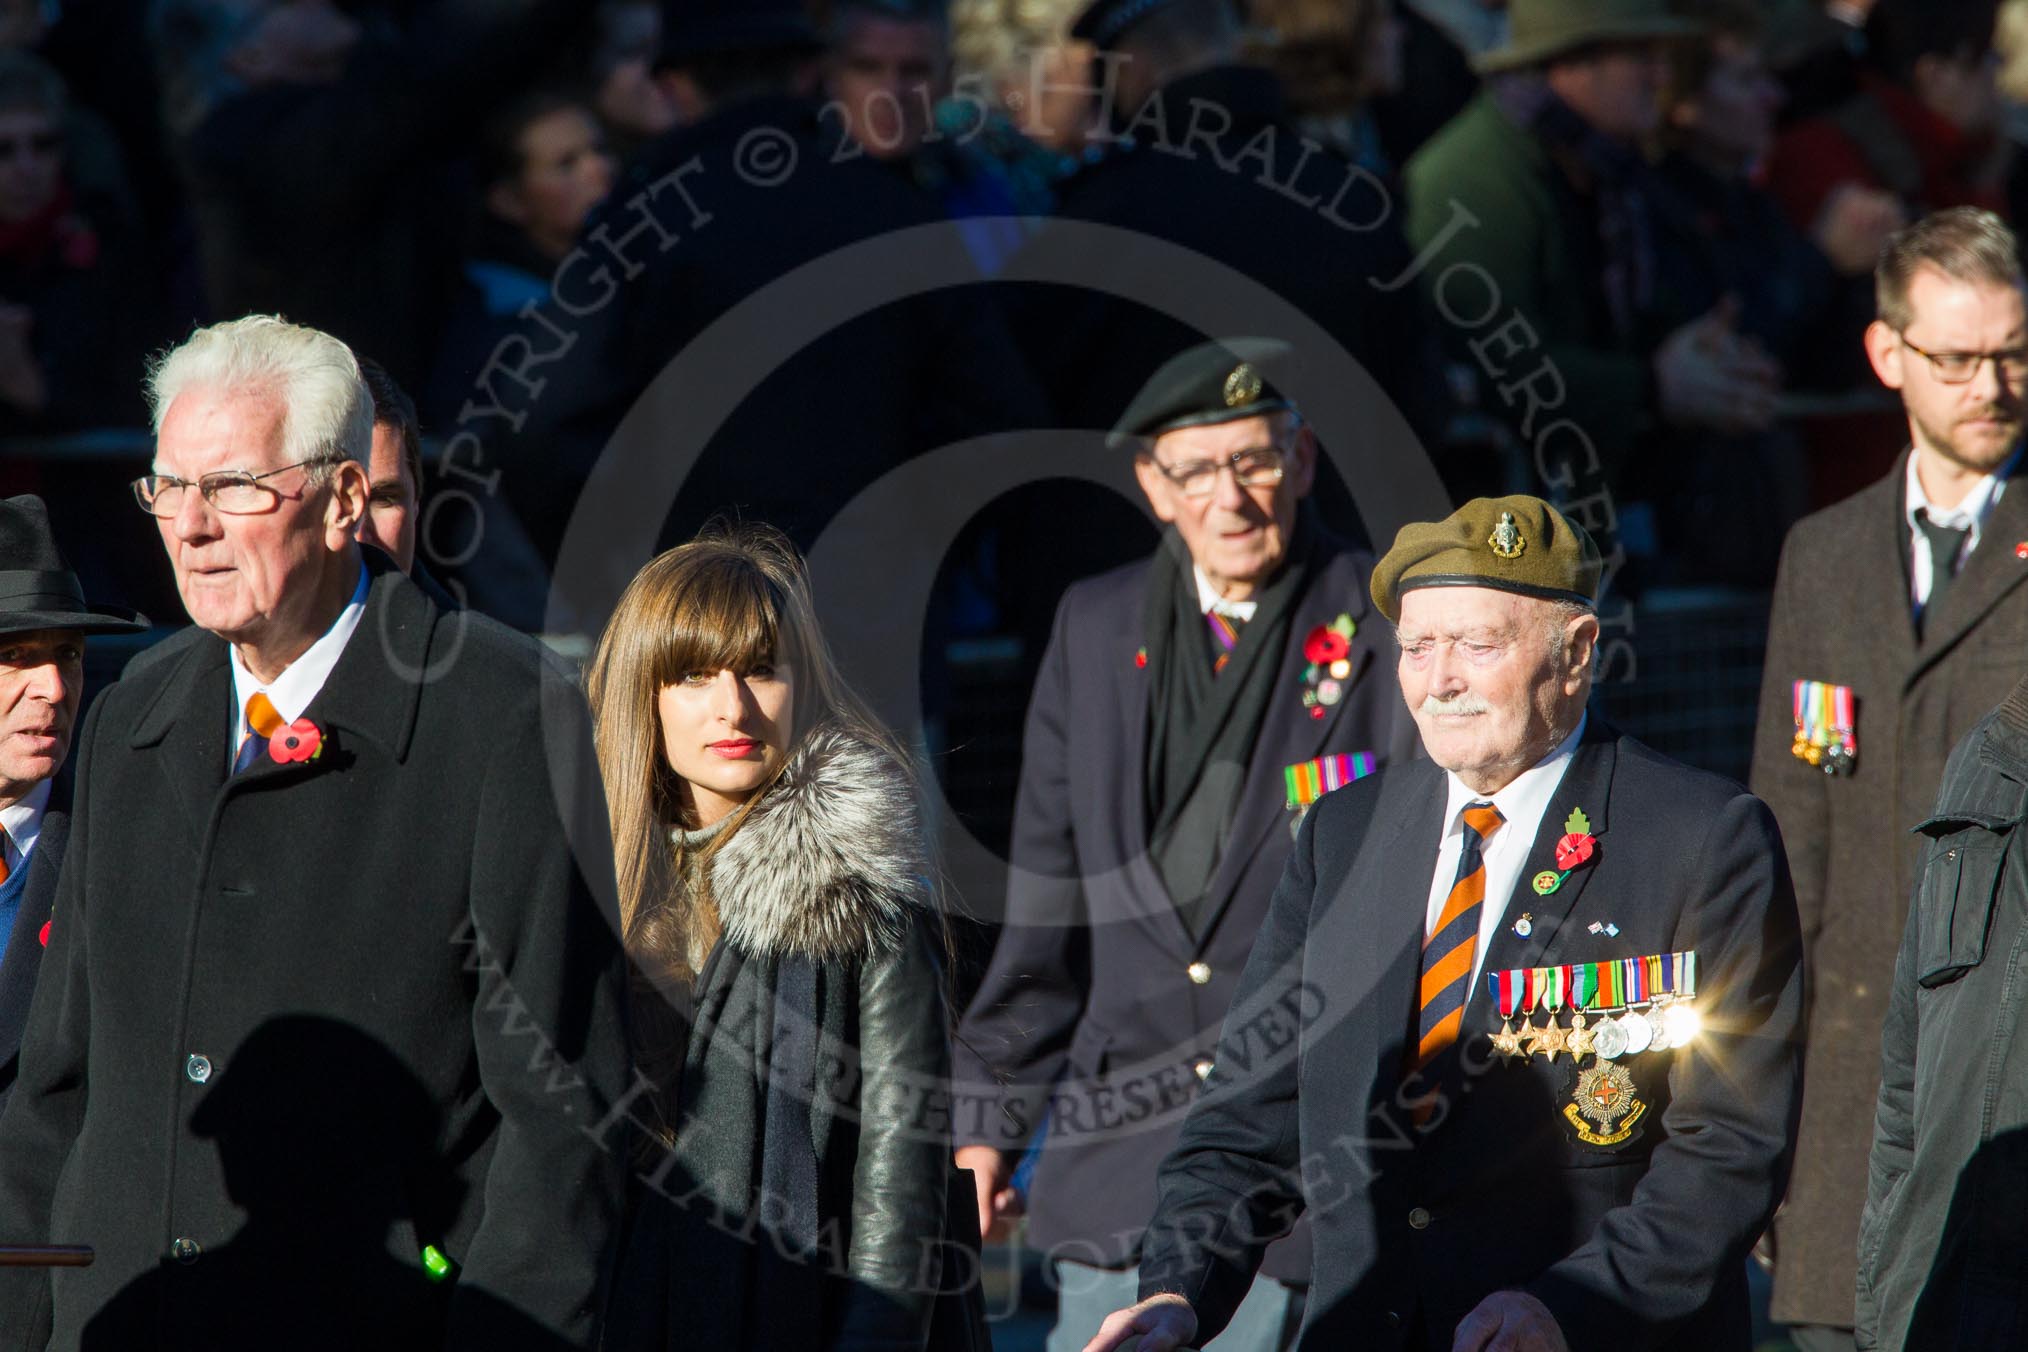 Remembrance Sunday Cenotaph March Past 2013: A33 - Royal Sussex Regimental Association..
Press stand opposite the Foreign Office building, Whitehall, London SW1,
London,
Greater London,
United Kingdom,
on 10 November 2013 at 11:58, image #1291